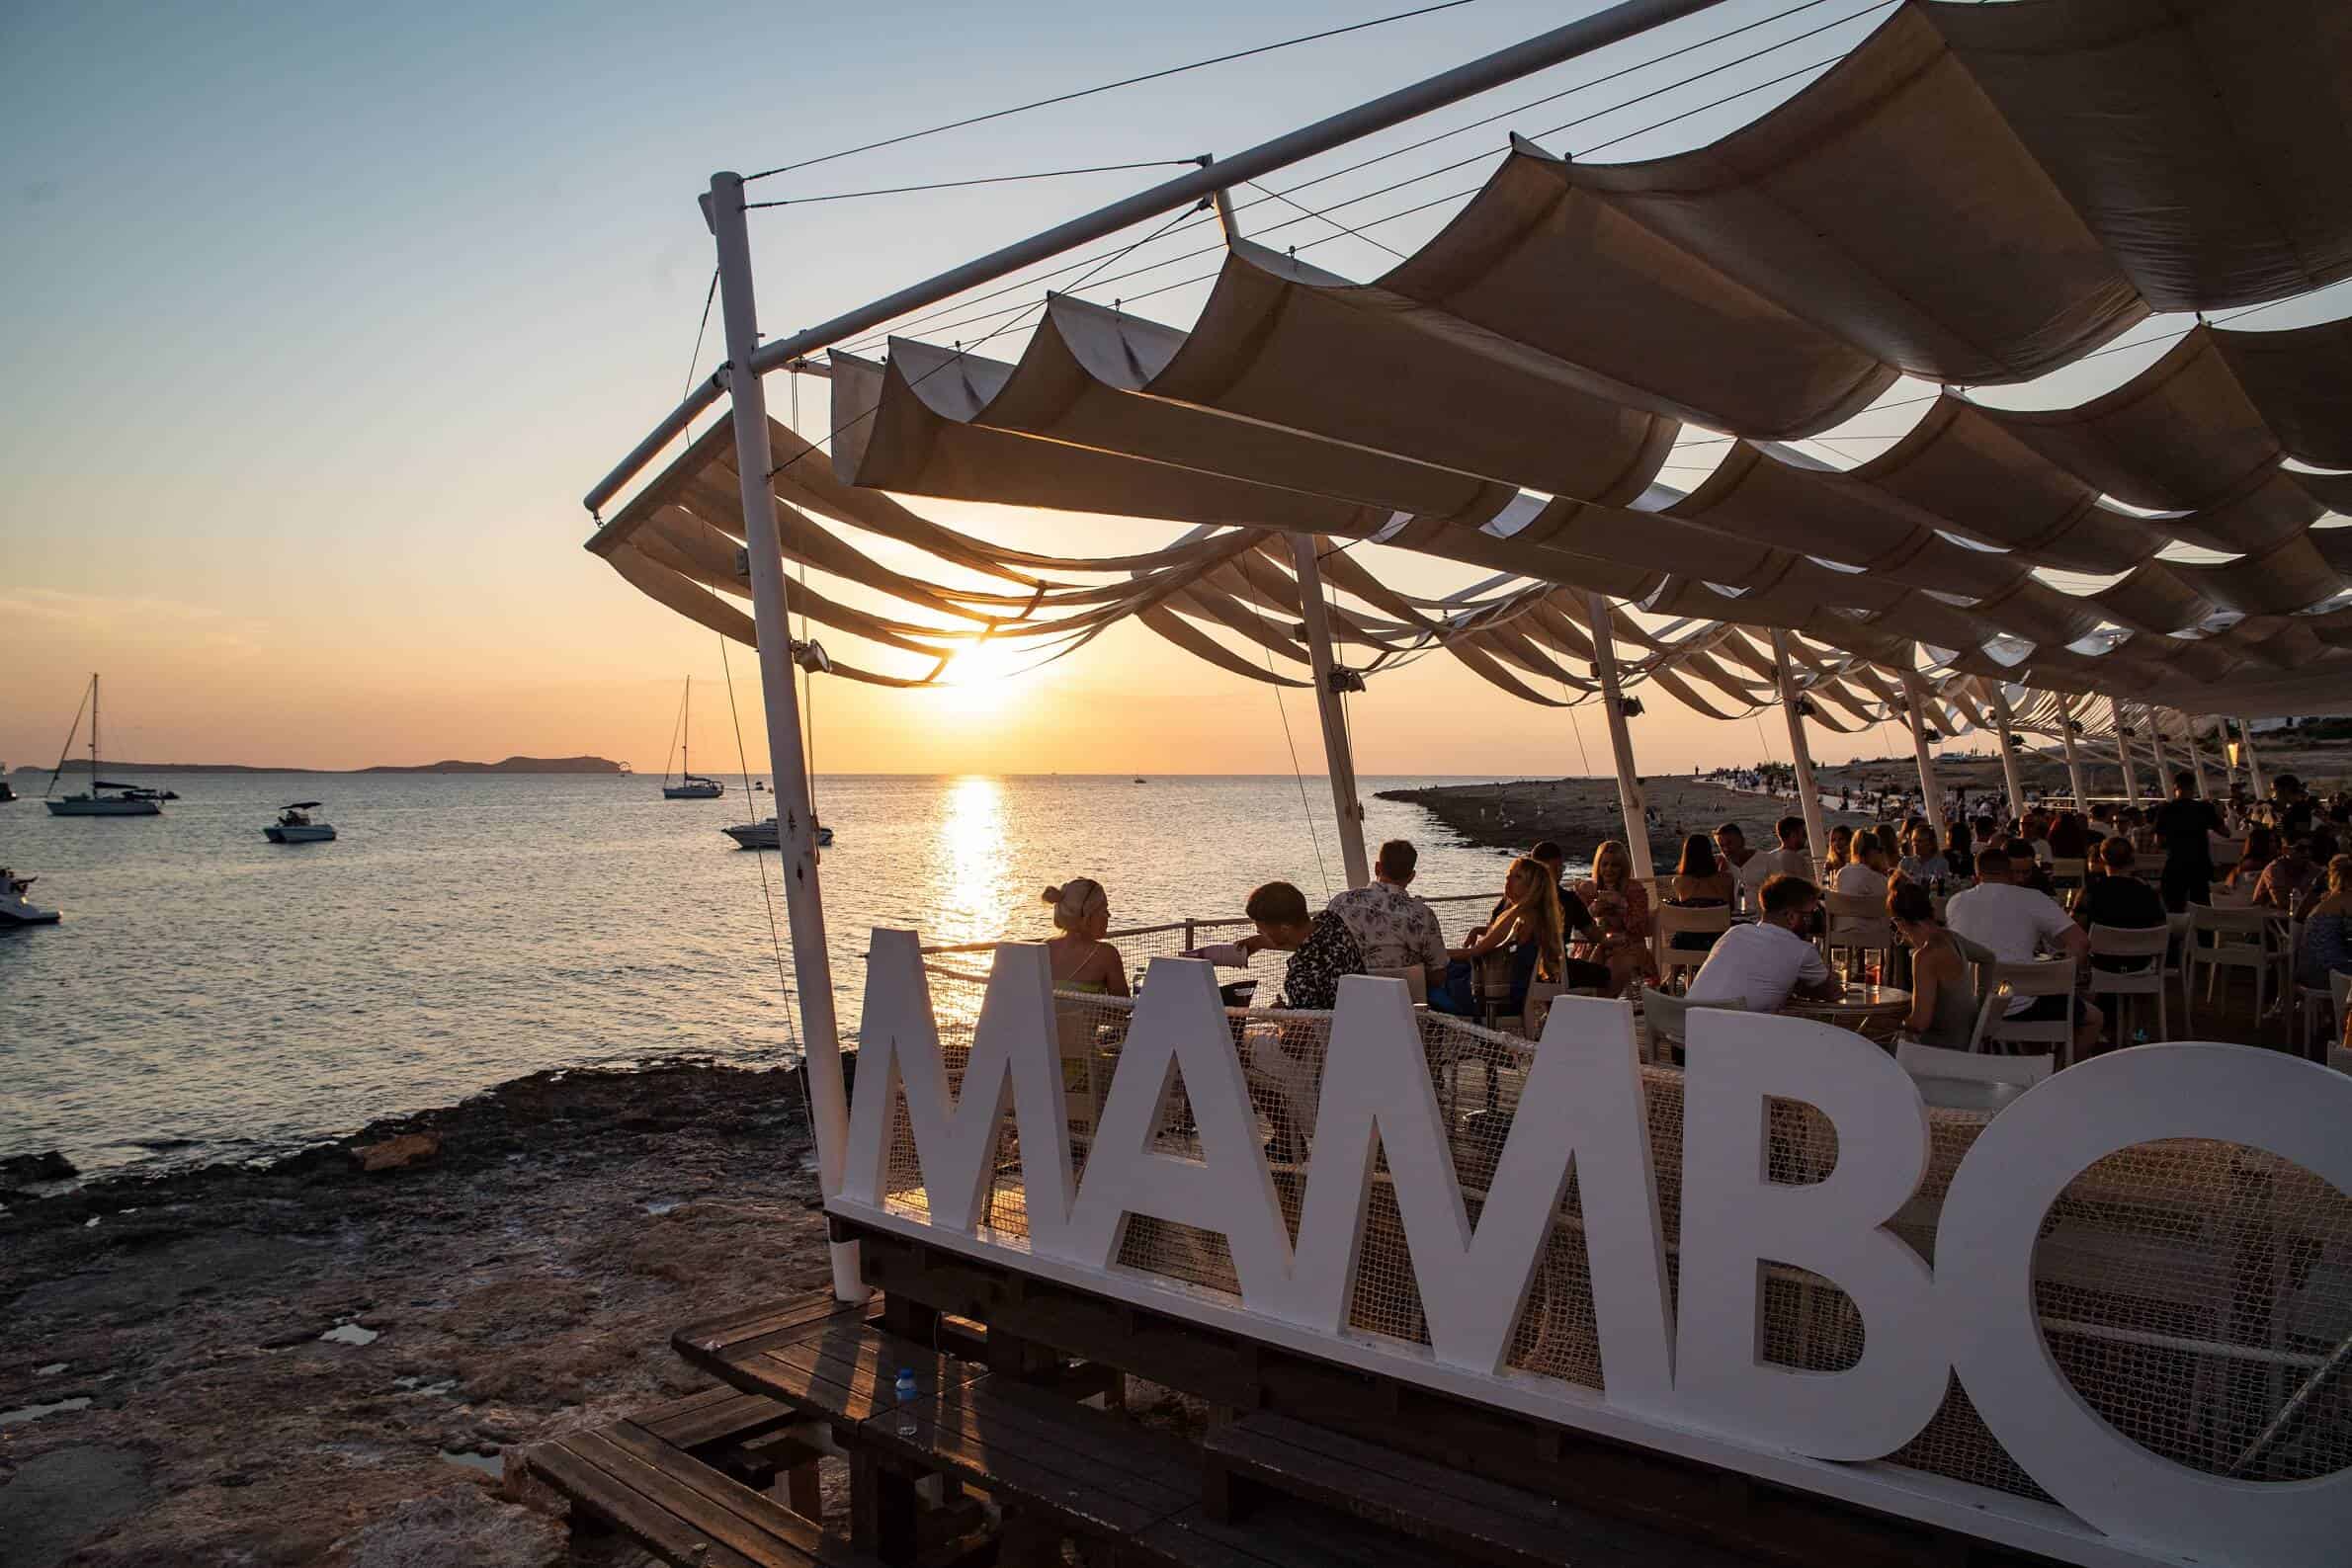 Café Mambo opens up for another exciting summer season in Ibiza